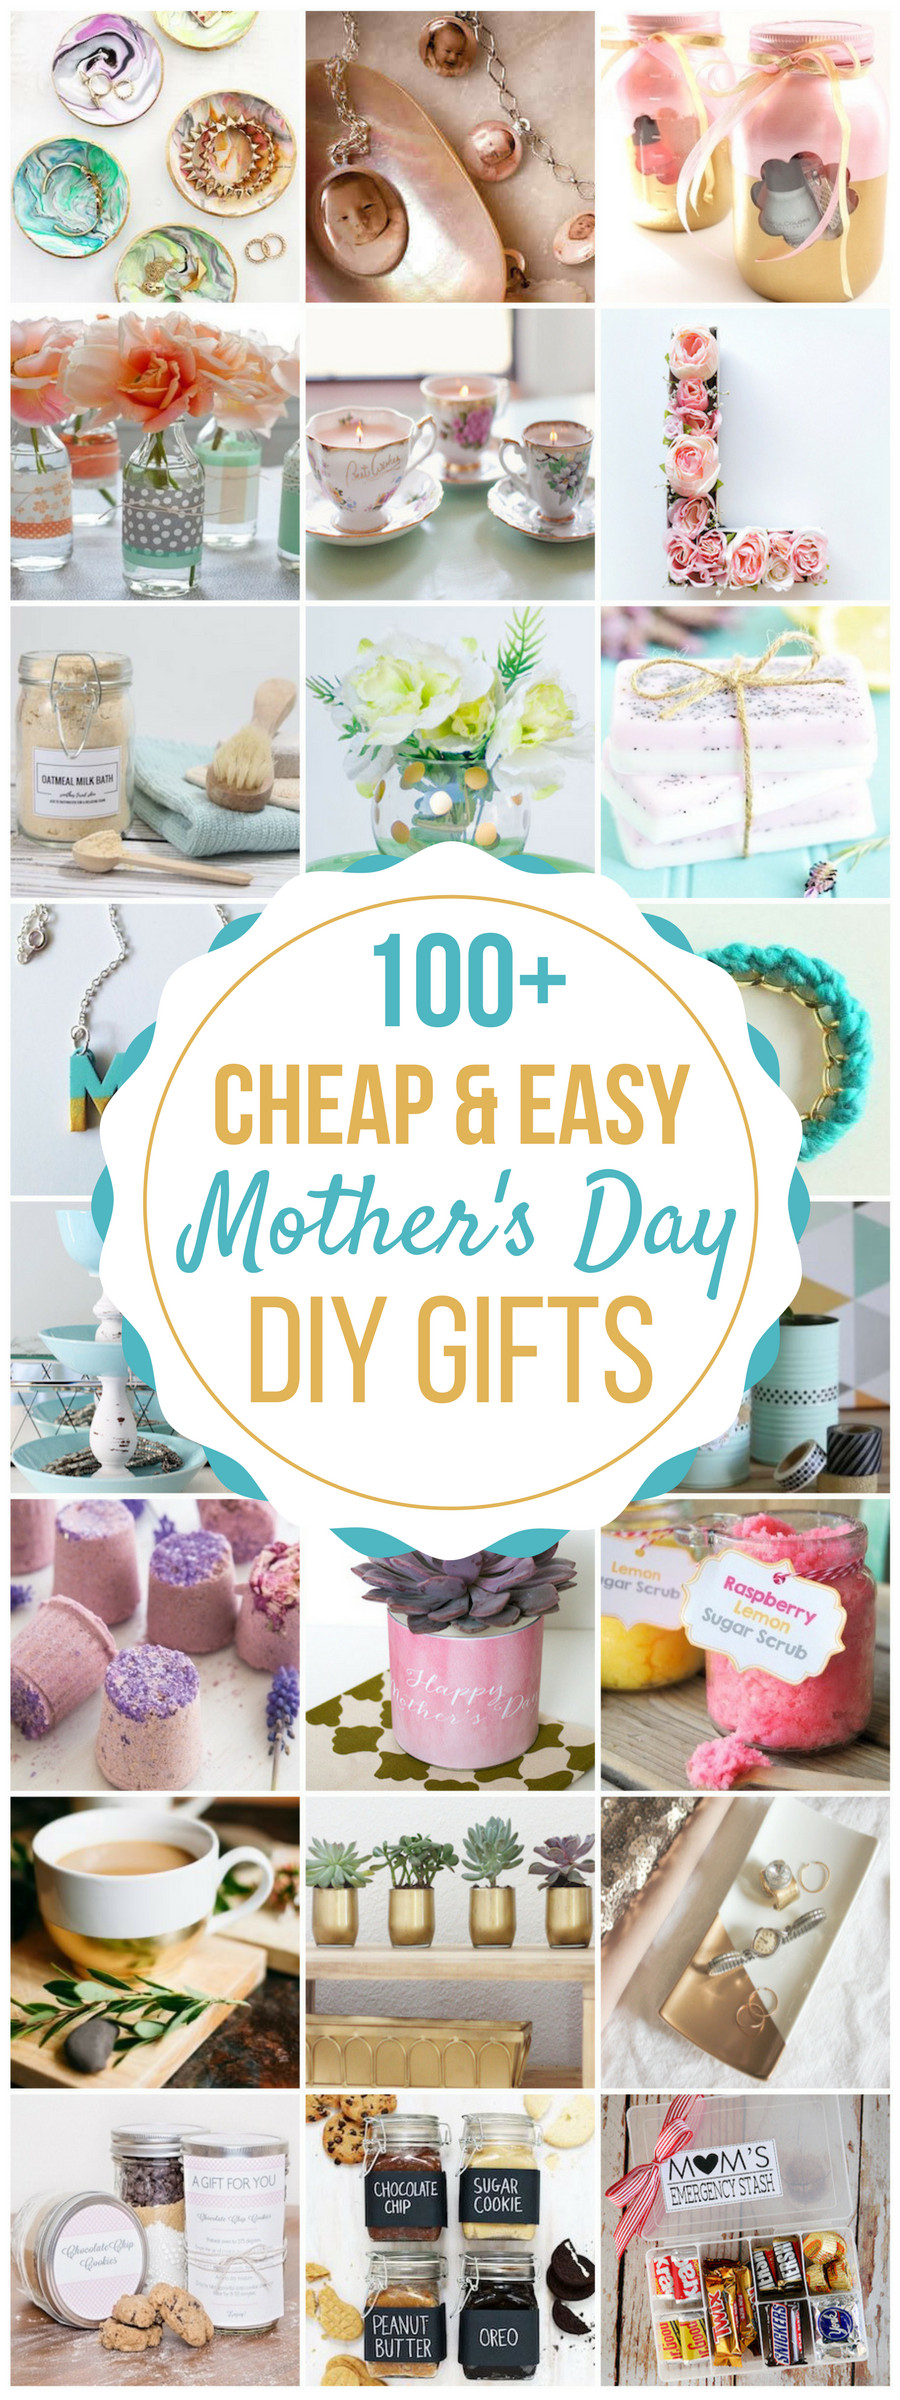 Making Mothers Day Gifts
 100 Cheap & Easy DIY Mother s Day Gifts Prudent Penny